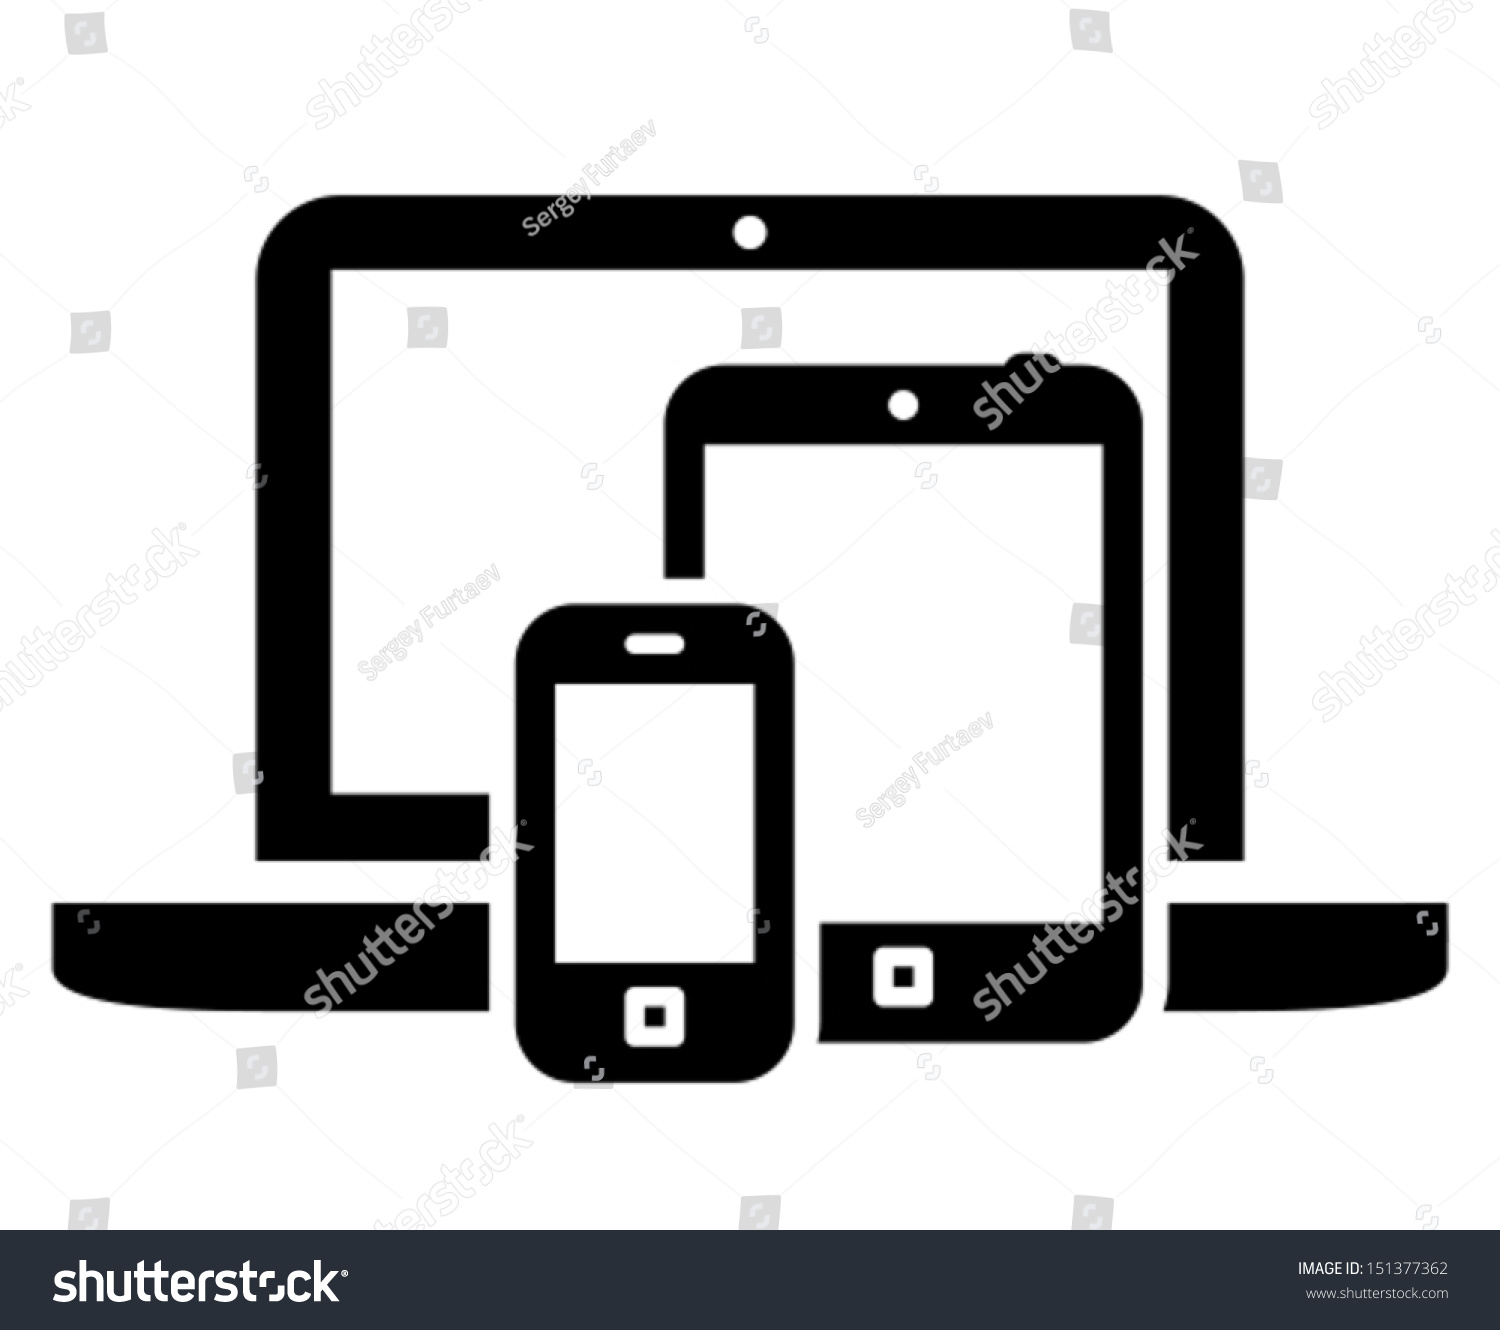 Mobile Devices Icon Stock Vector Illustration 151377362 : Shutterstock